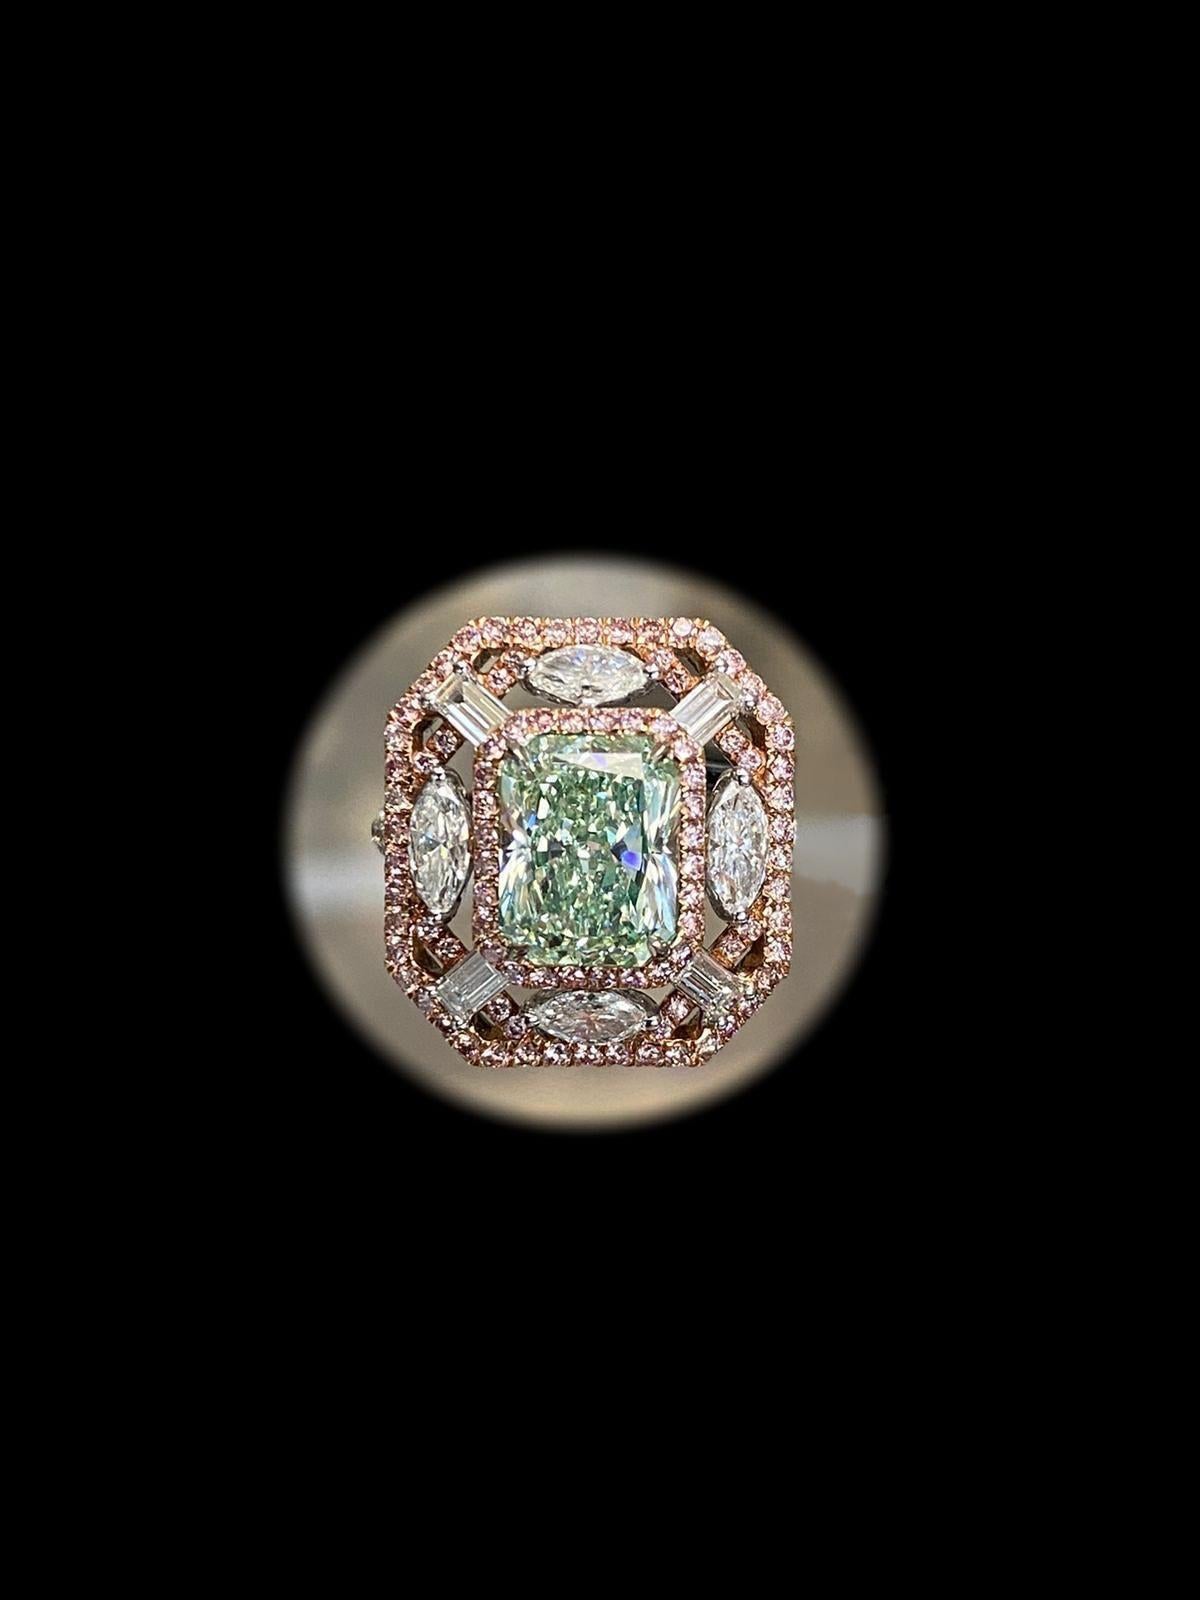 From the Emilio Jewelry Museum Vault, Showcasing a stunning Gia certified 3.00 carat natural fancy yellowish green diamond set in the center. As opposed to yellow green, yellowish means it has only about a 10% yellow overtone (yellow green would be